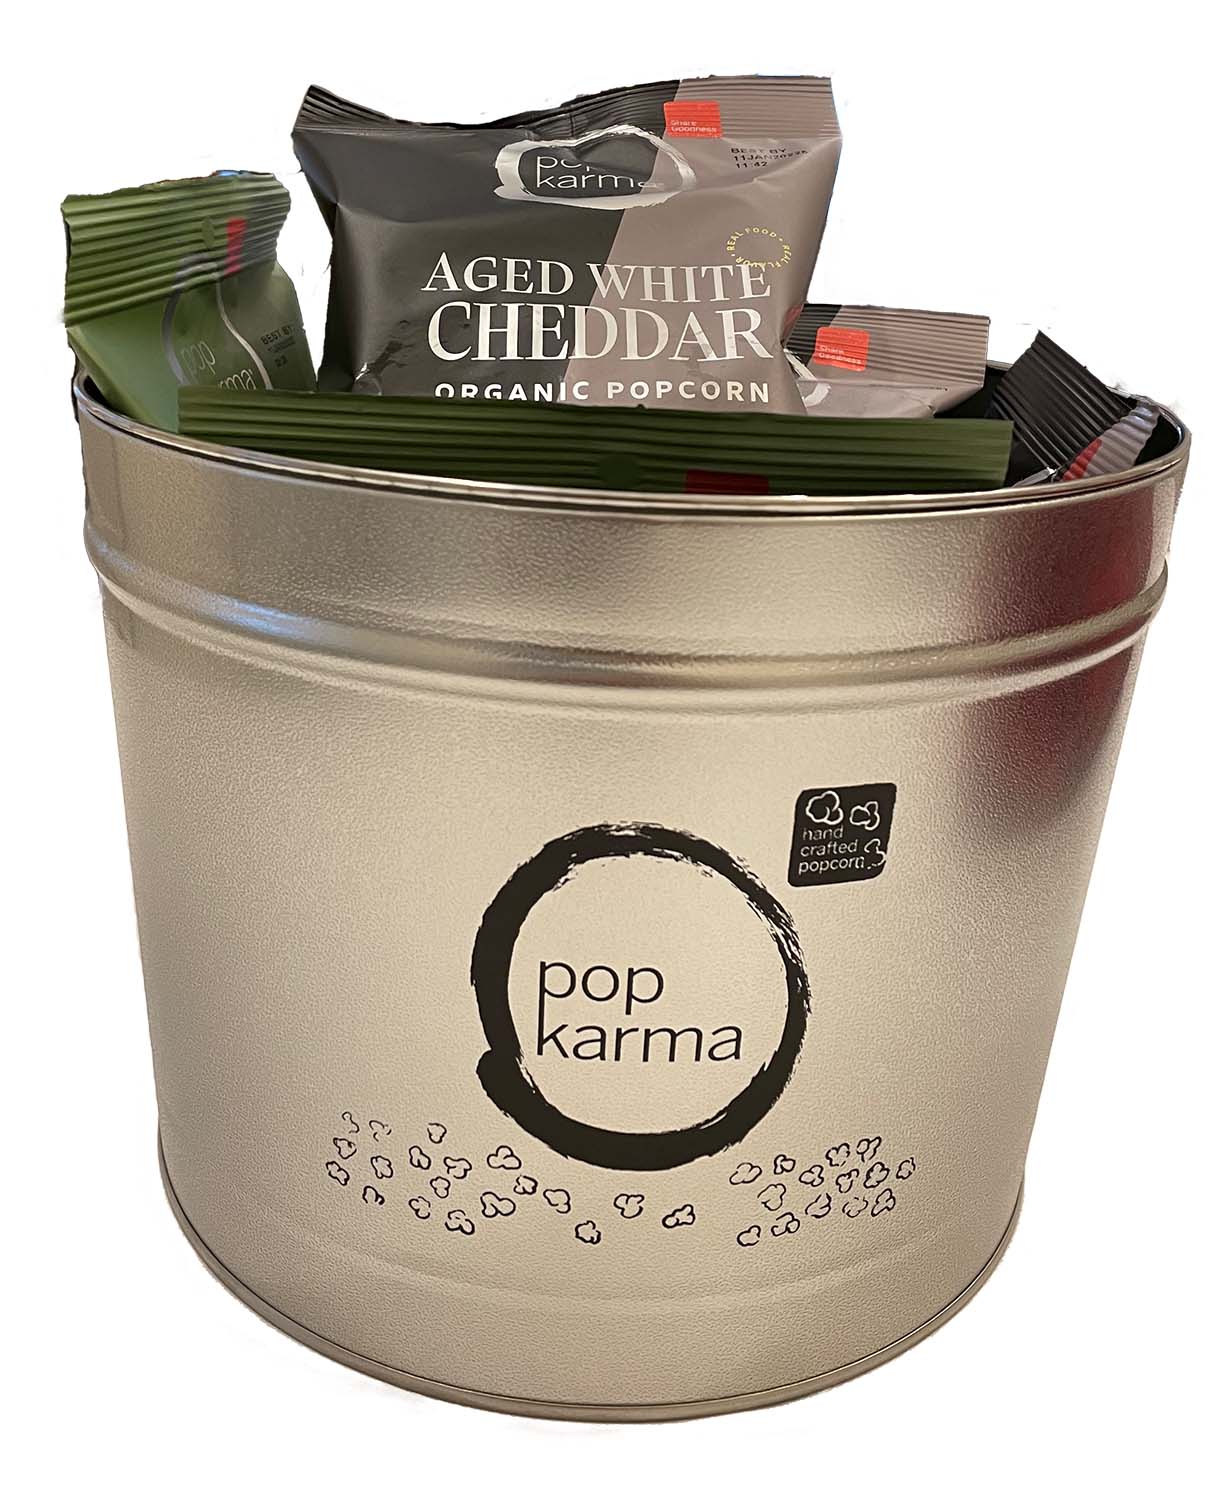 Karma Popcorn Tins are Back in Time for Gift Giving